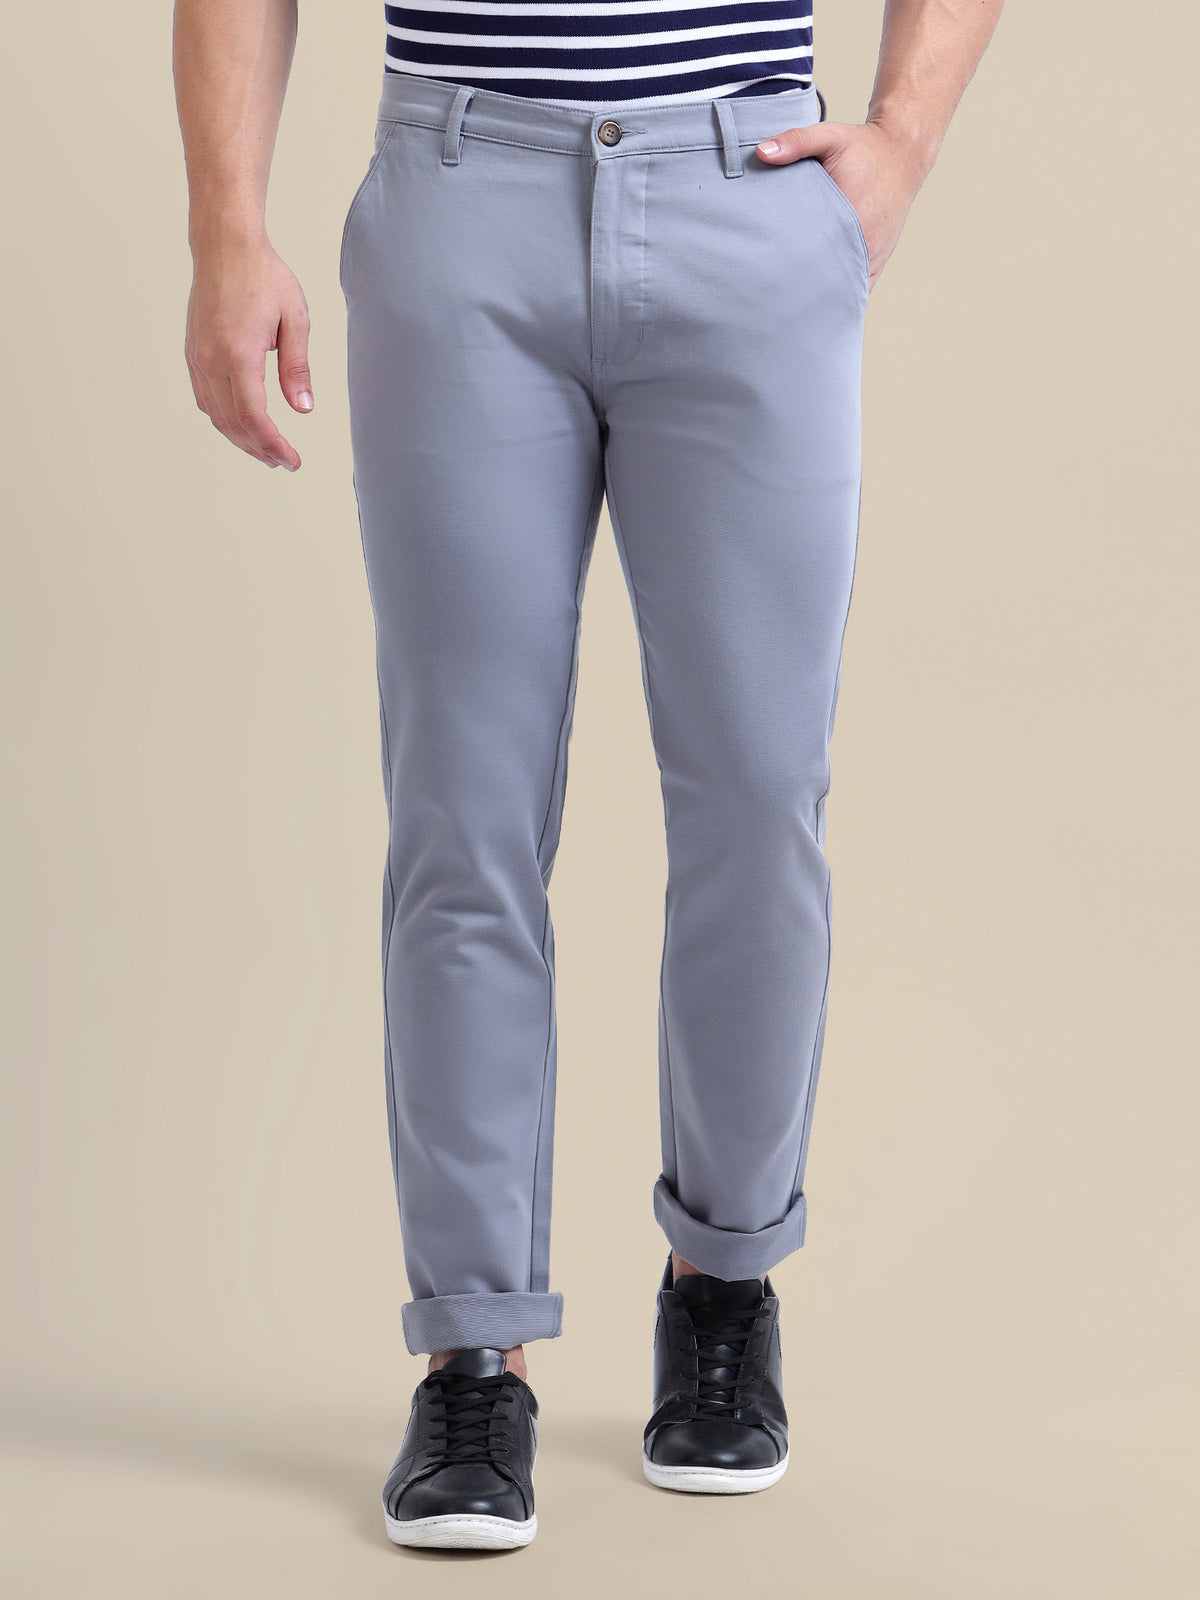 Light Blue Casual Trousers Solid Cotton Lycra Smart Fit